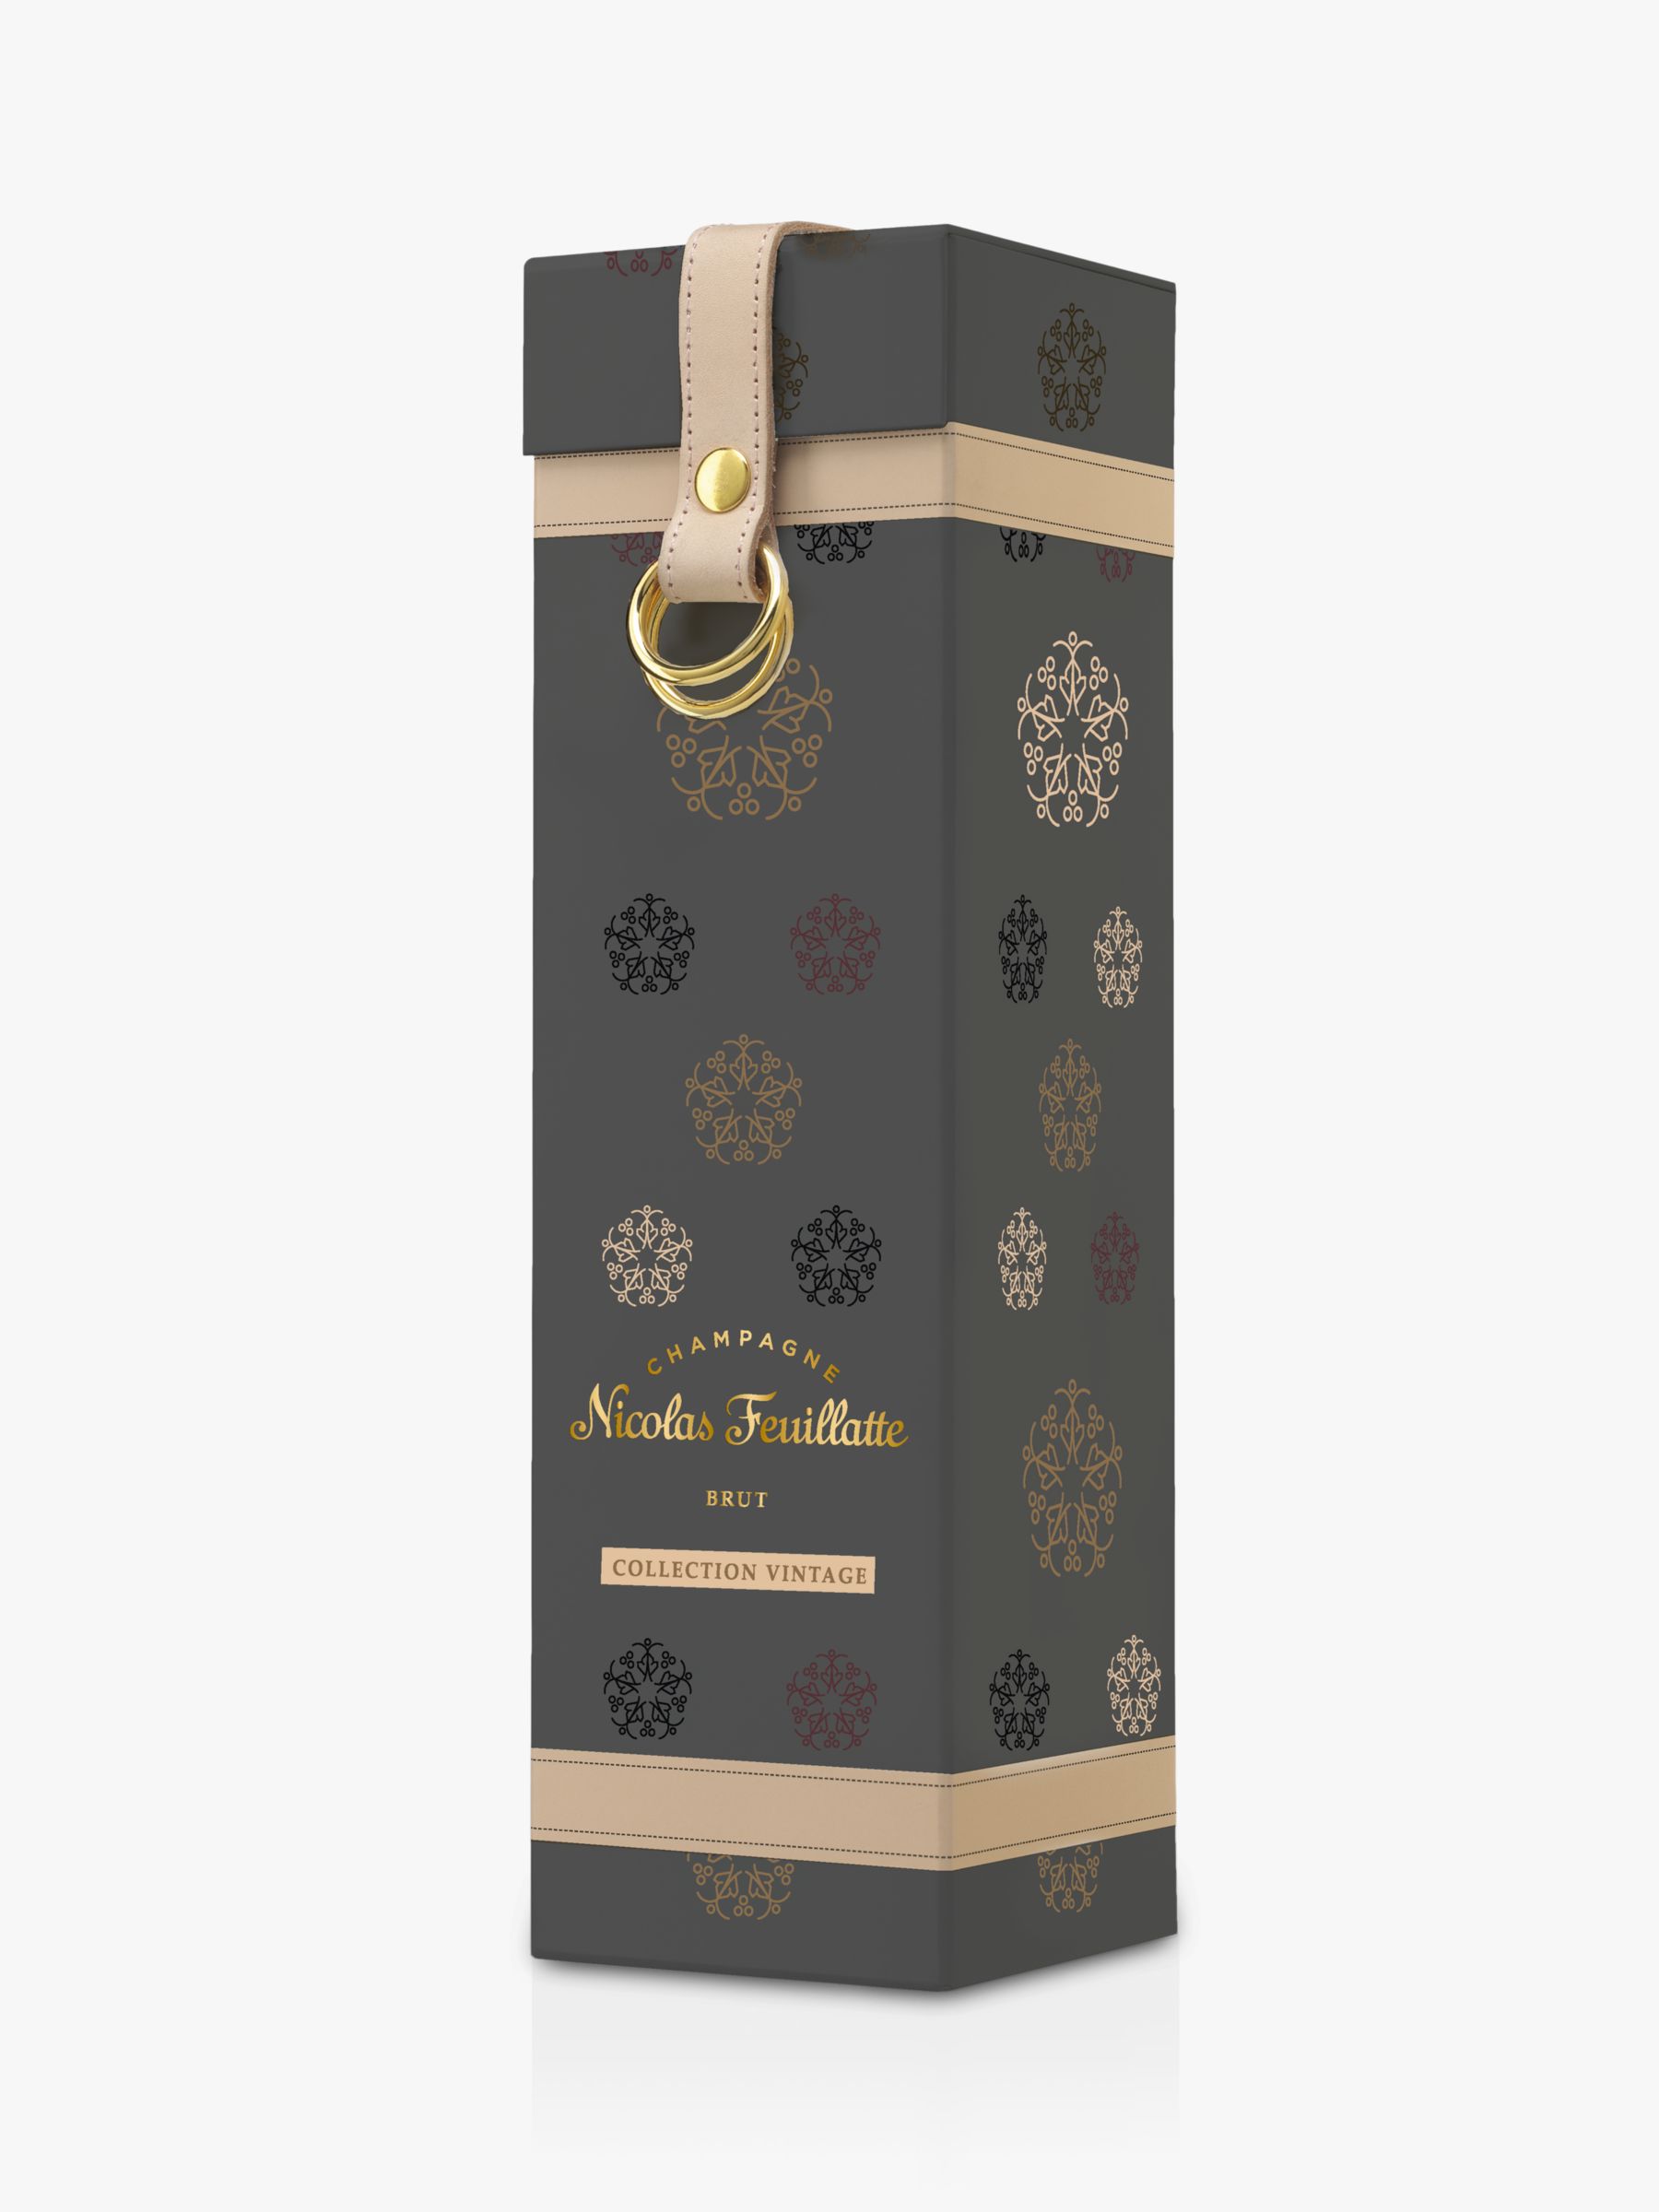 Nicolas Feuillatte Brut Collection Vintage Champagne in Gift Case, 75cl